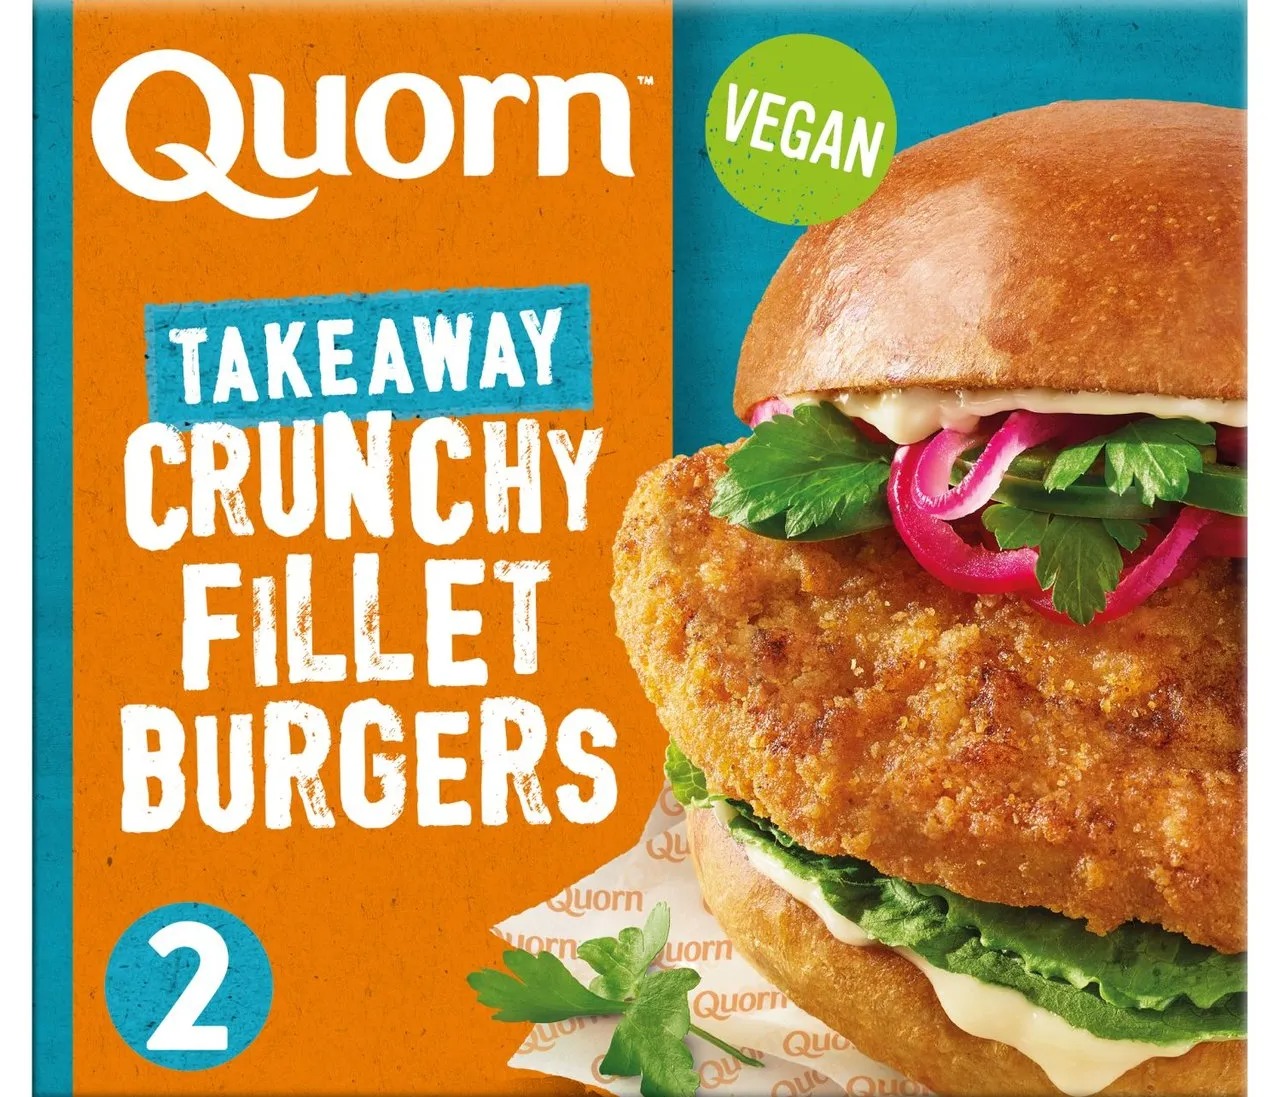 A pack of two Quorn Takeaway crunchy fillet burgers is now £1.50 at Morrisons